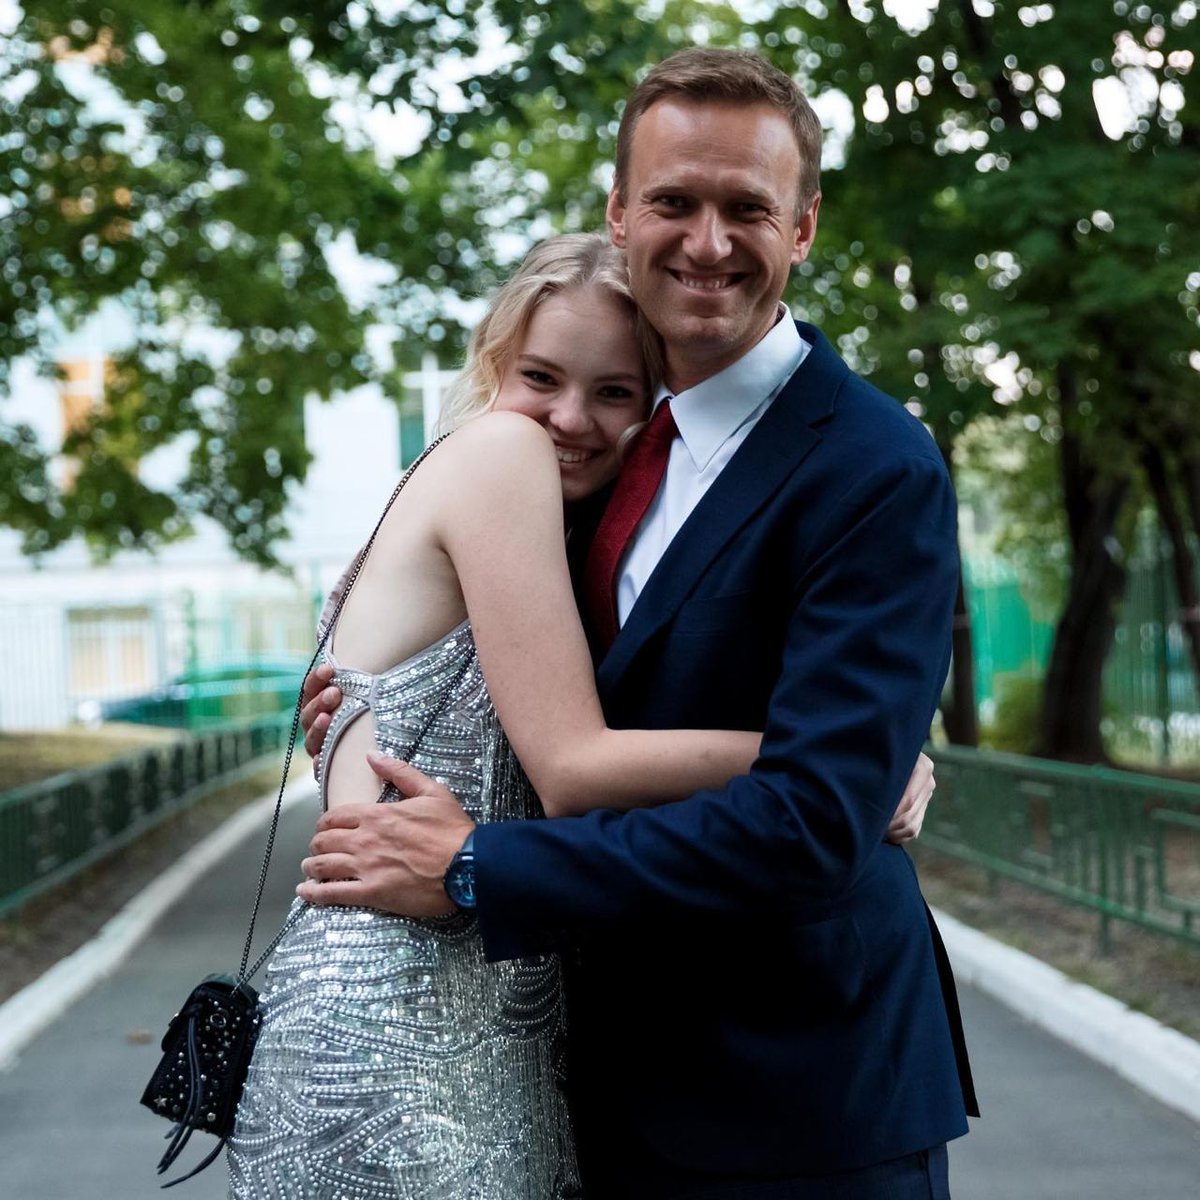 Alexei Navalny’s daughter @Dasha_Navalnaya: Dad, you were an example for many across the globe. Your optimism and contagious, sincere smile. Your curiosity and thirst for knowledge. Your incredible ability to find common ground with anyone. Your wit. Your sense of humor. Your…